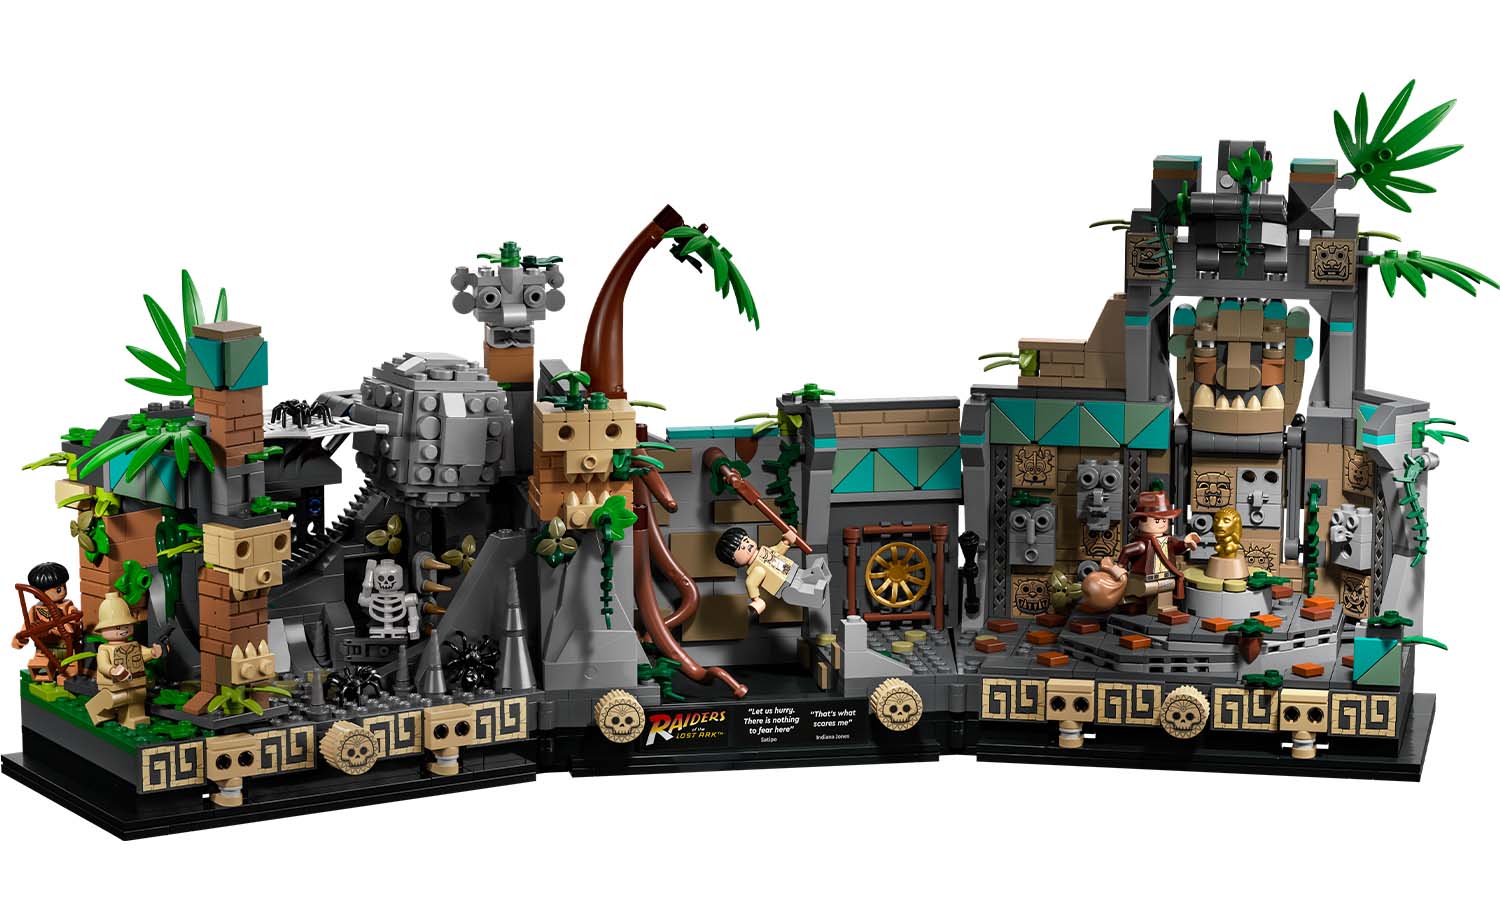 1545-Piece LEGO Raiders of the Lost Ark: Temple of the Golden Idol Building Set